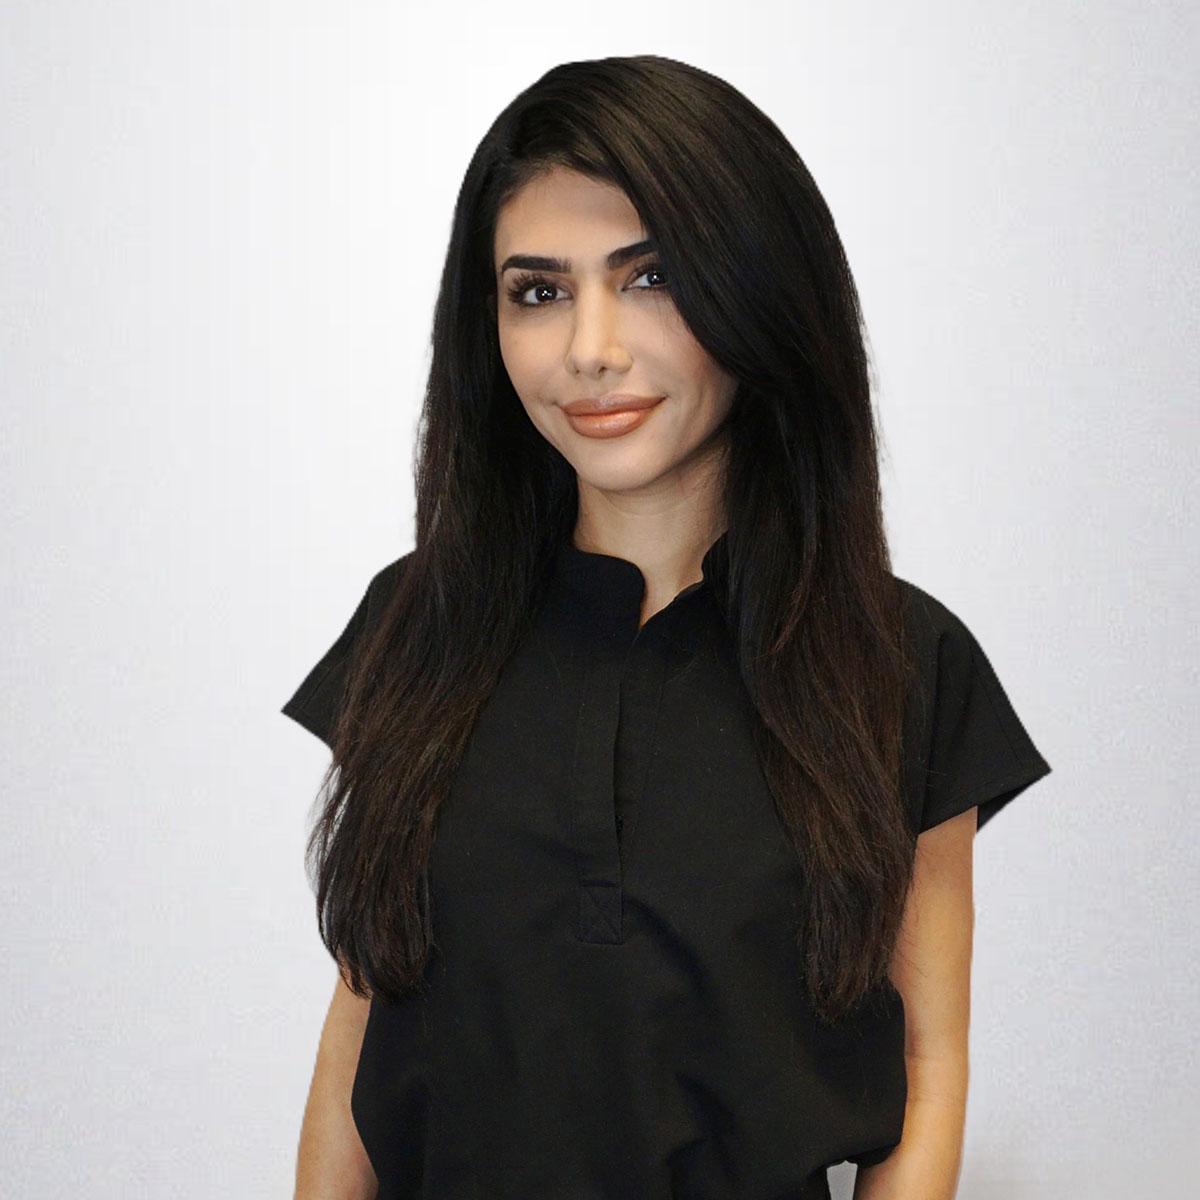 Noor-Hoda Hakimjavadi, MS RDN, registered dietitian and nutritionist at Southern California Multi-Specialty Center serving Los Angeles